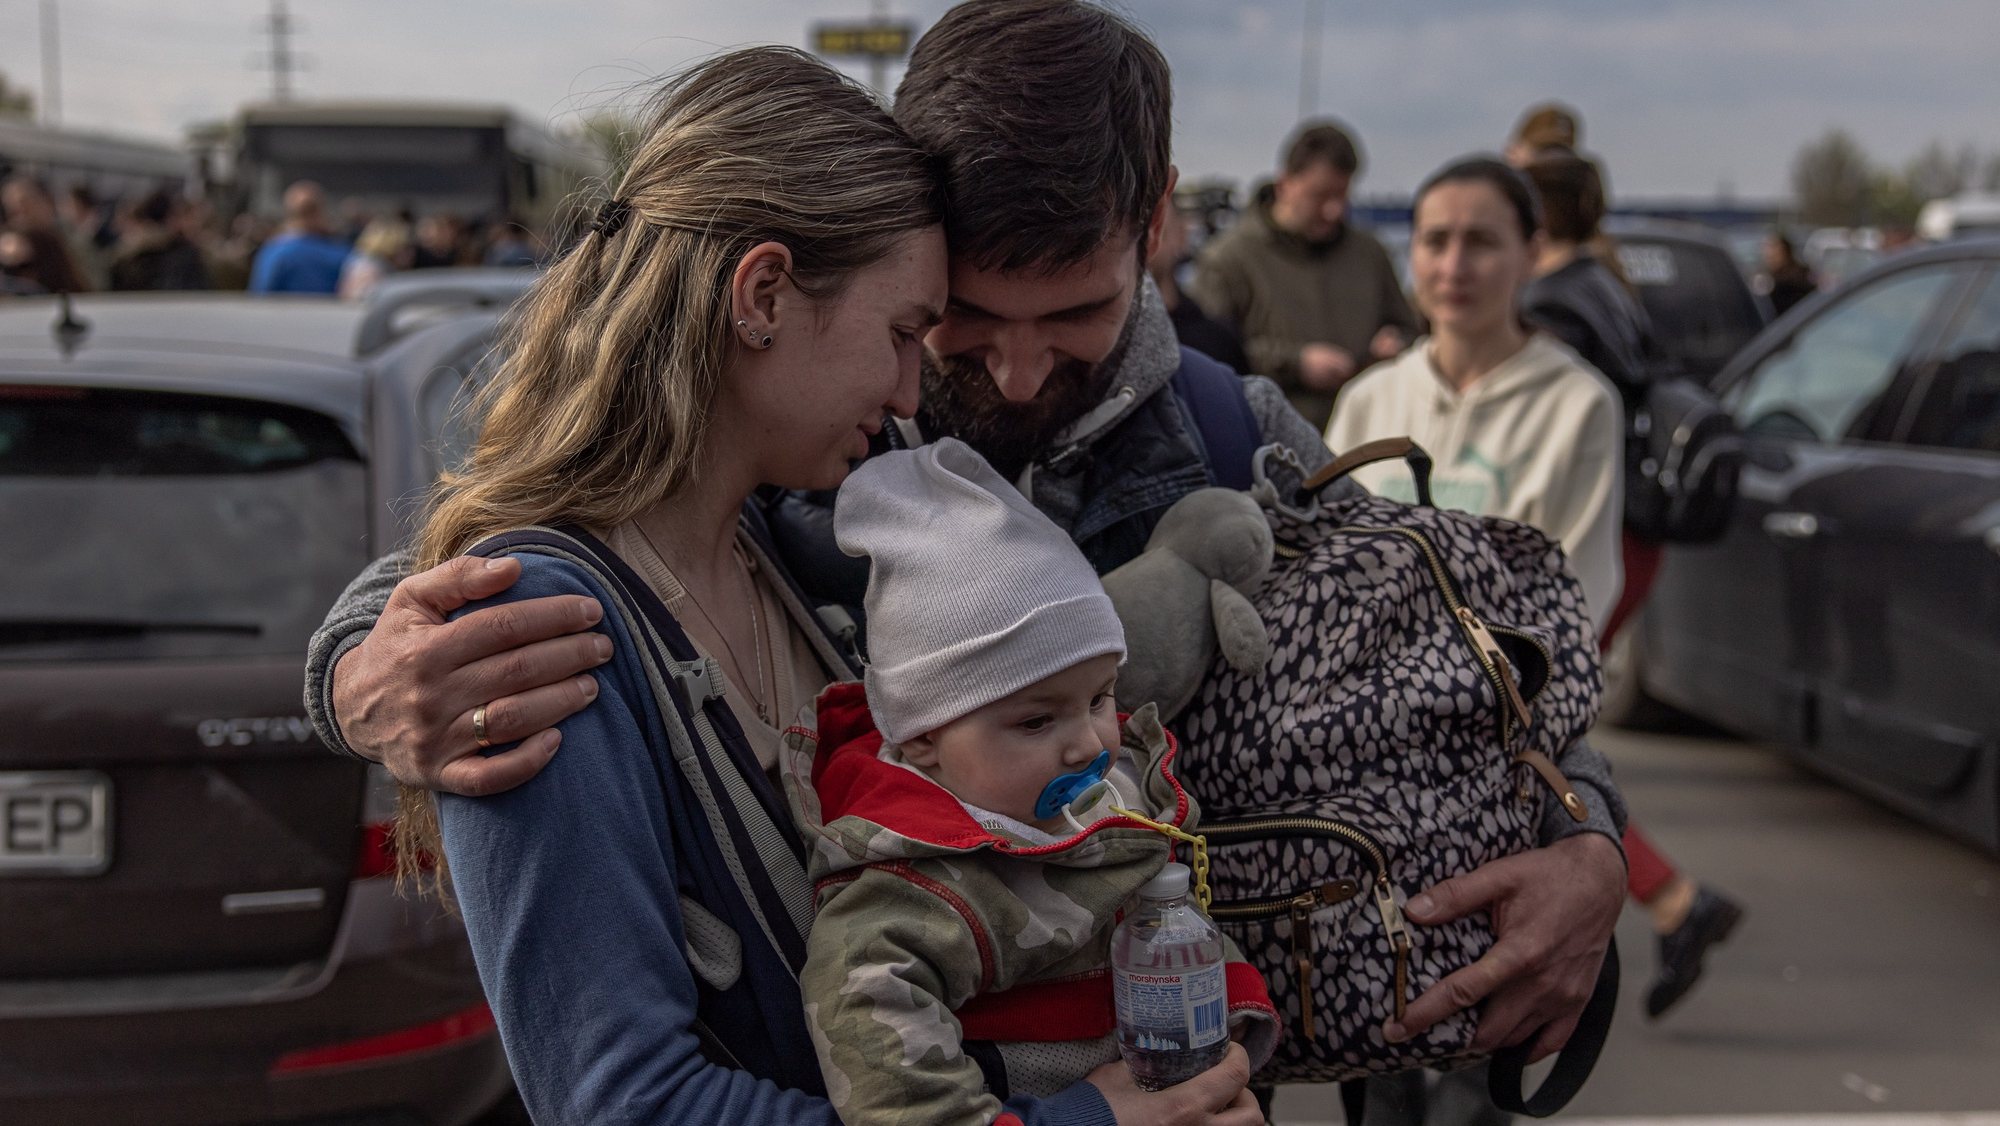 epa09924897 A man welcomes Anna and her son Svyatoslav who were evacuated from Mariupol at the evacuation point in Zaporizhzhia, Ukraine, 03 May 2022. Around 100 civilians were evacuated from the steel plant, the last Ukrainian-controlled area in the southern port city of Mariupol, according to Ukrainian officials. Thousands of people who were still in Mariupol and other areas in South Ukraine occupied by the Russian army waited to be evacuated to Ukraine&#039;s controlled area by buses and their own cars.  EPA/ROMAN PILIPEY